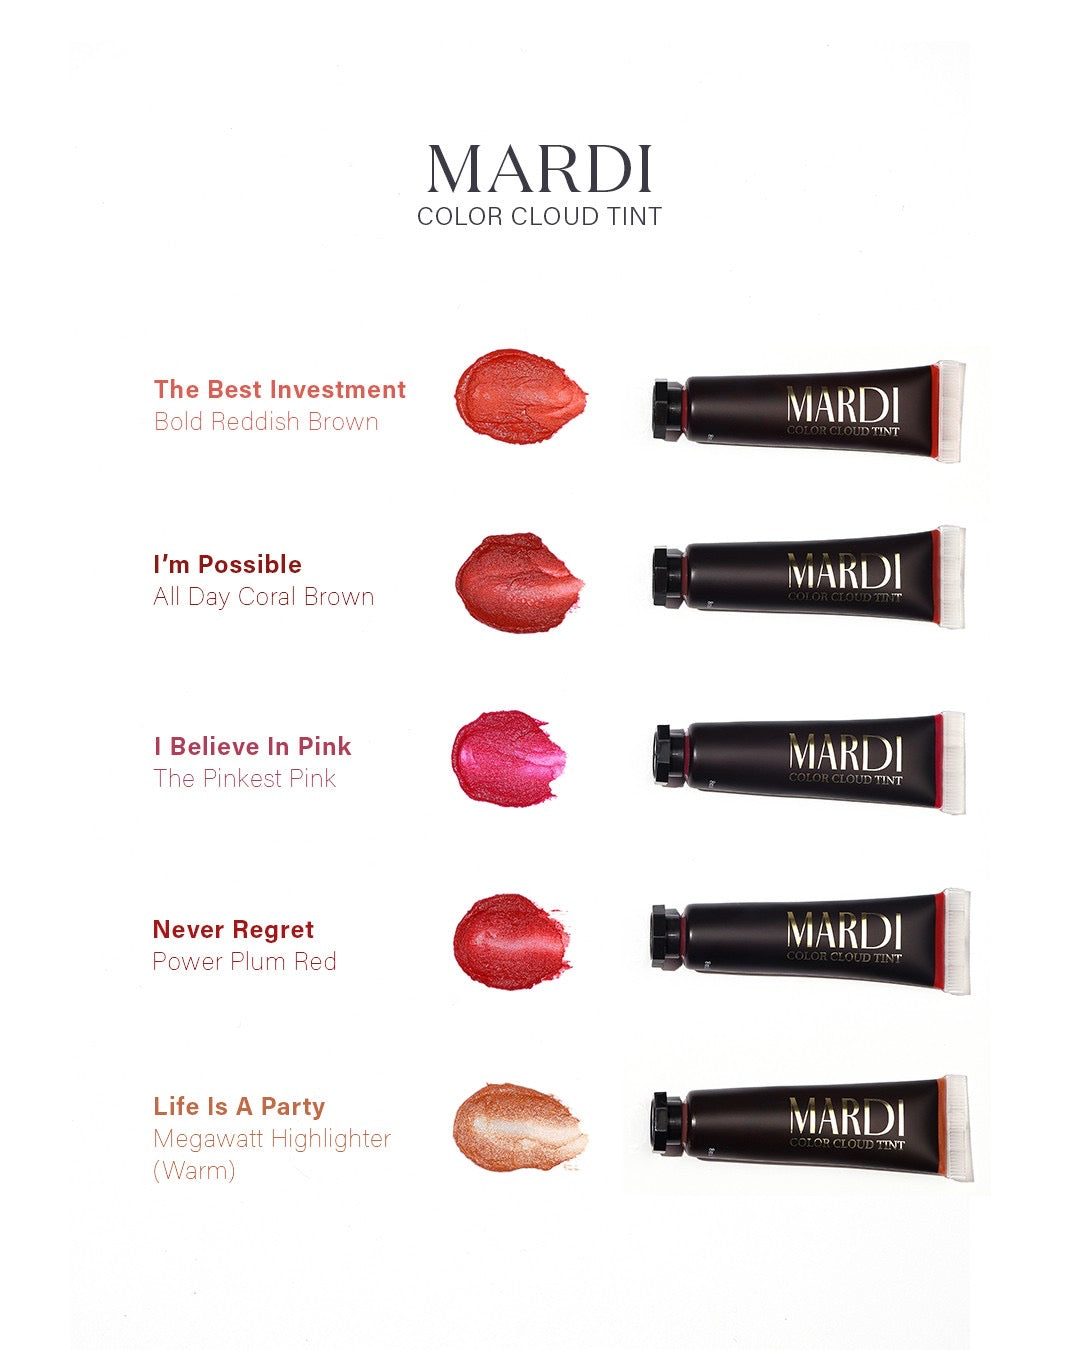 Mardi Color Cloud Tint (The Best Investment)